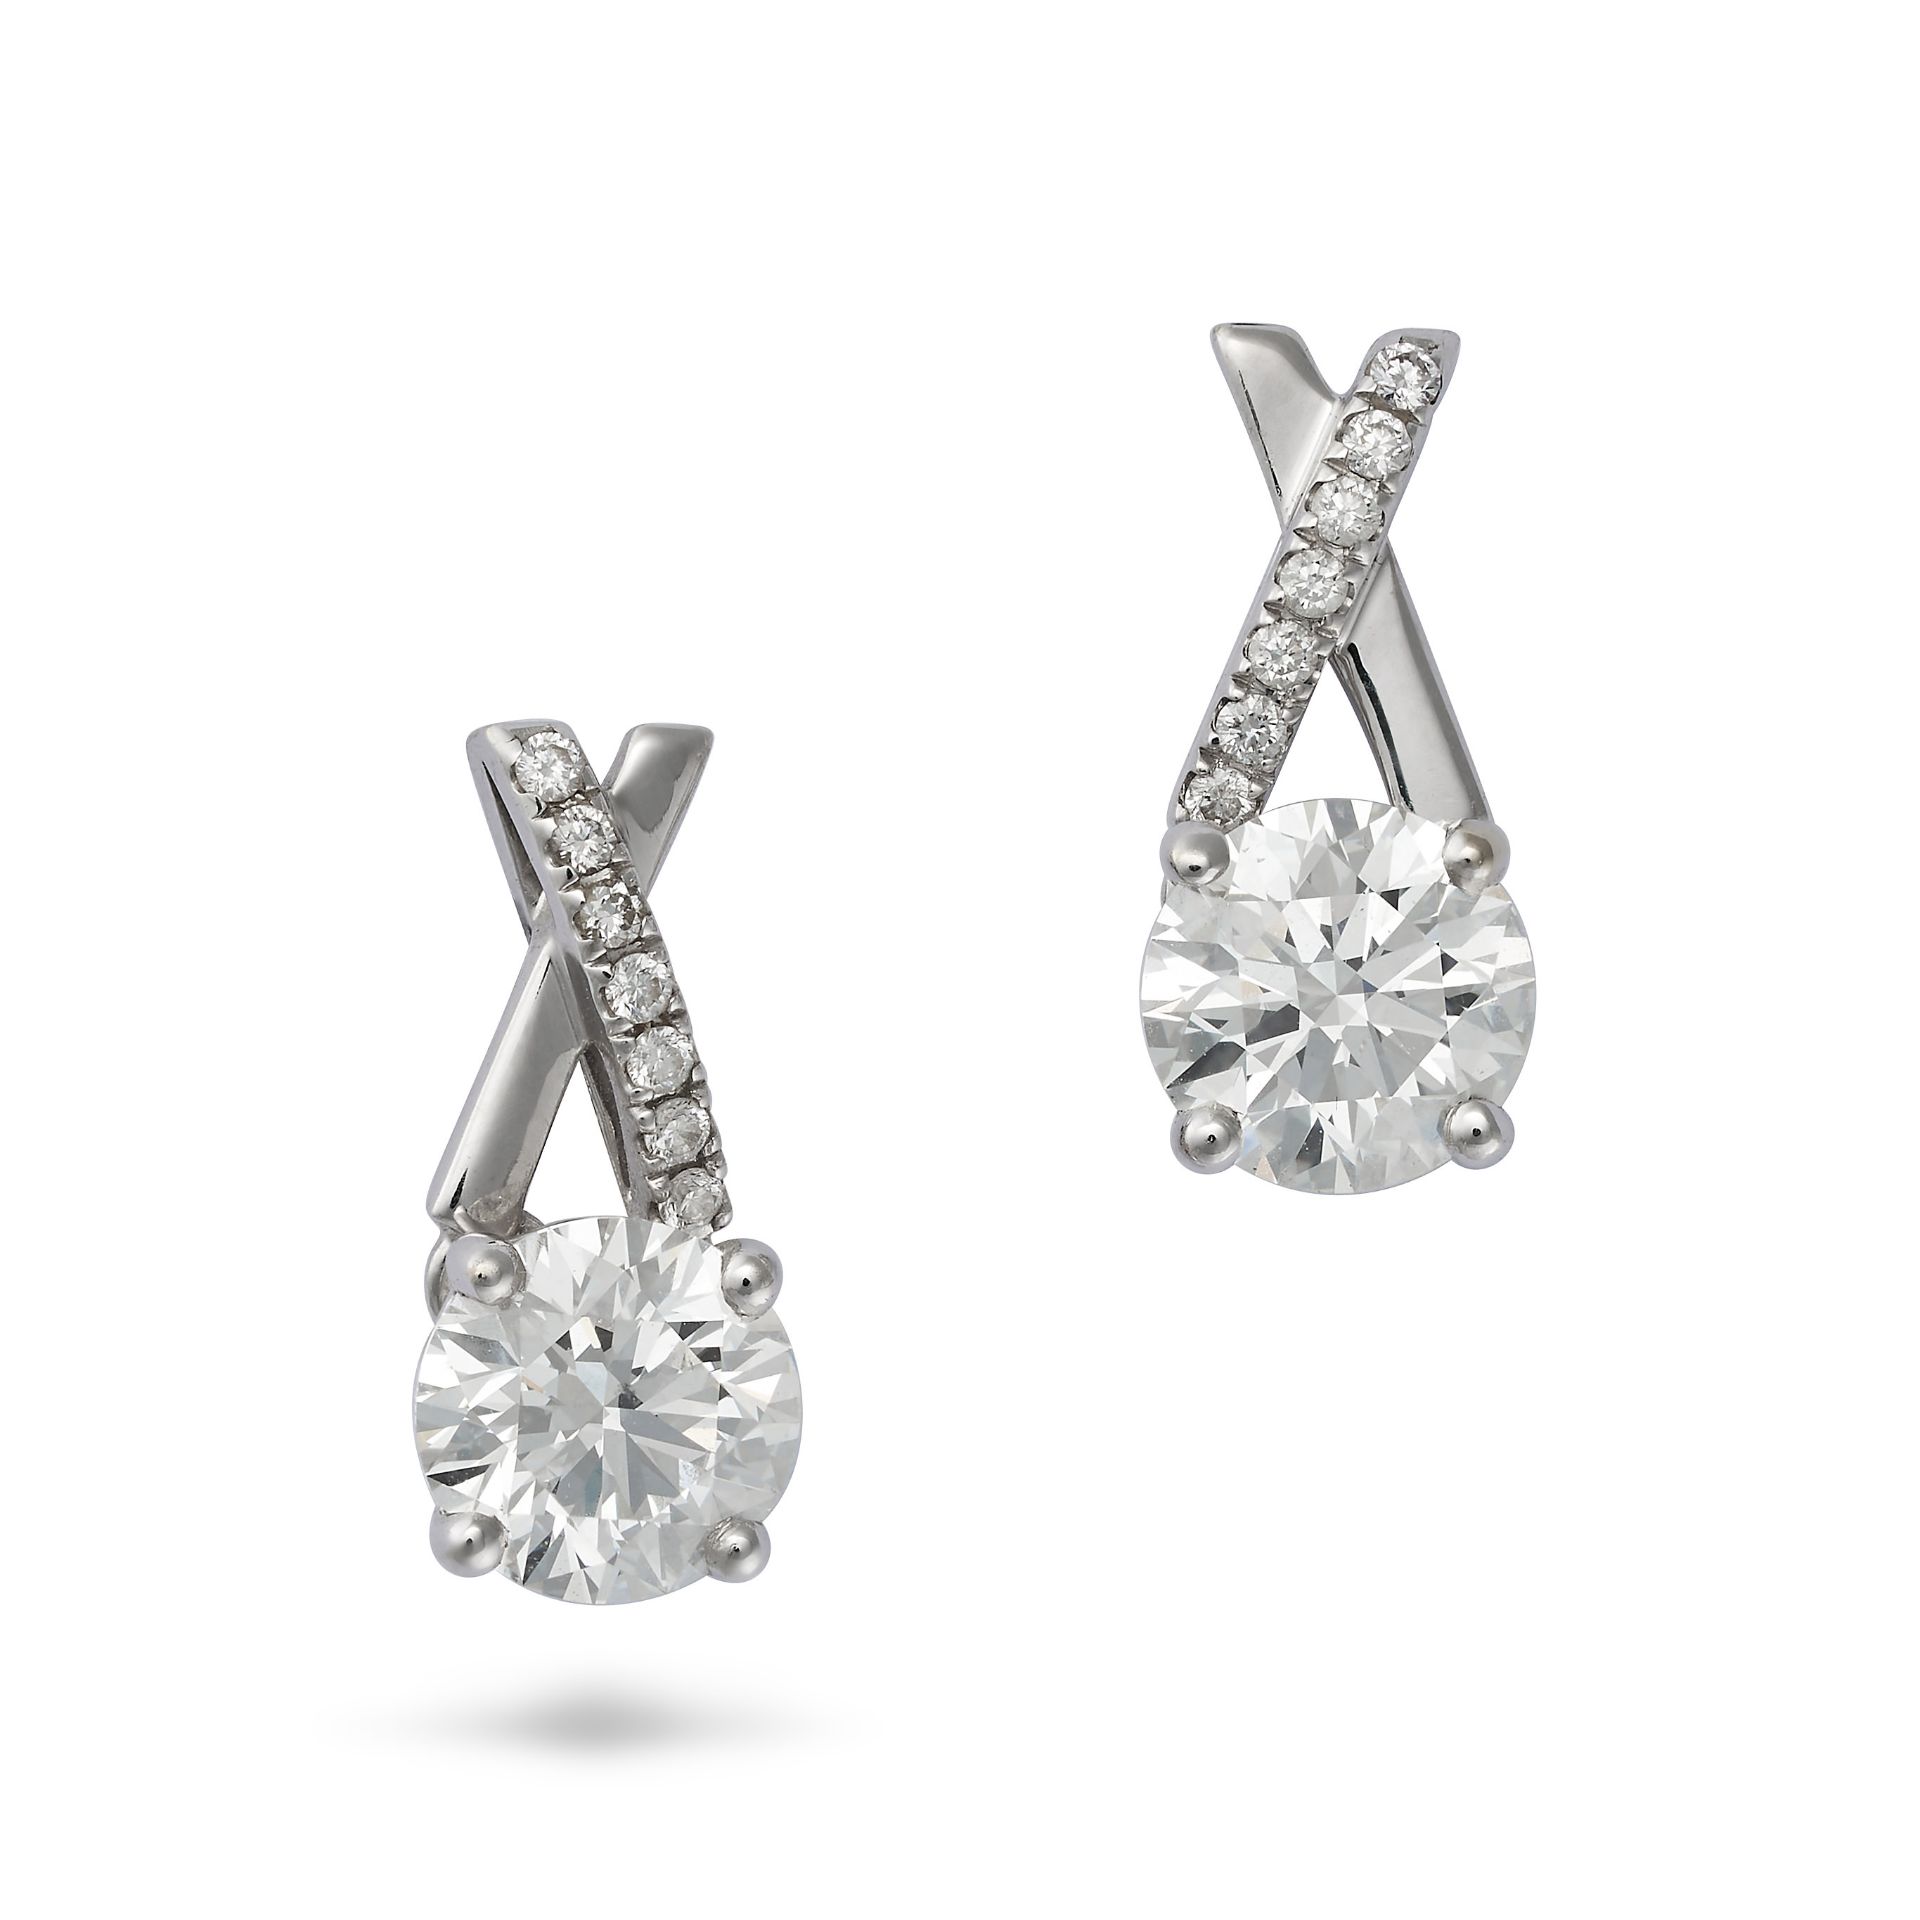 DE BEERS, A PAIR OF DIAMOND EARRINGS in 18ct white gold, each comprising an X motif set with roun...